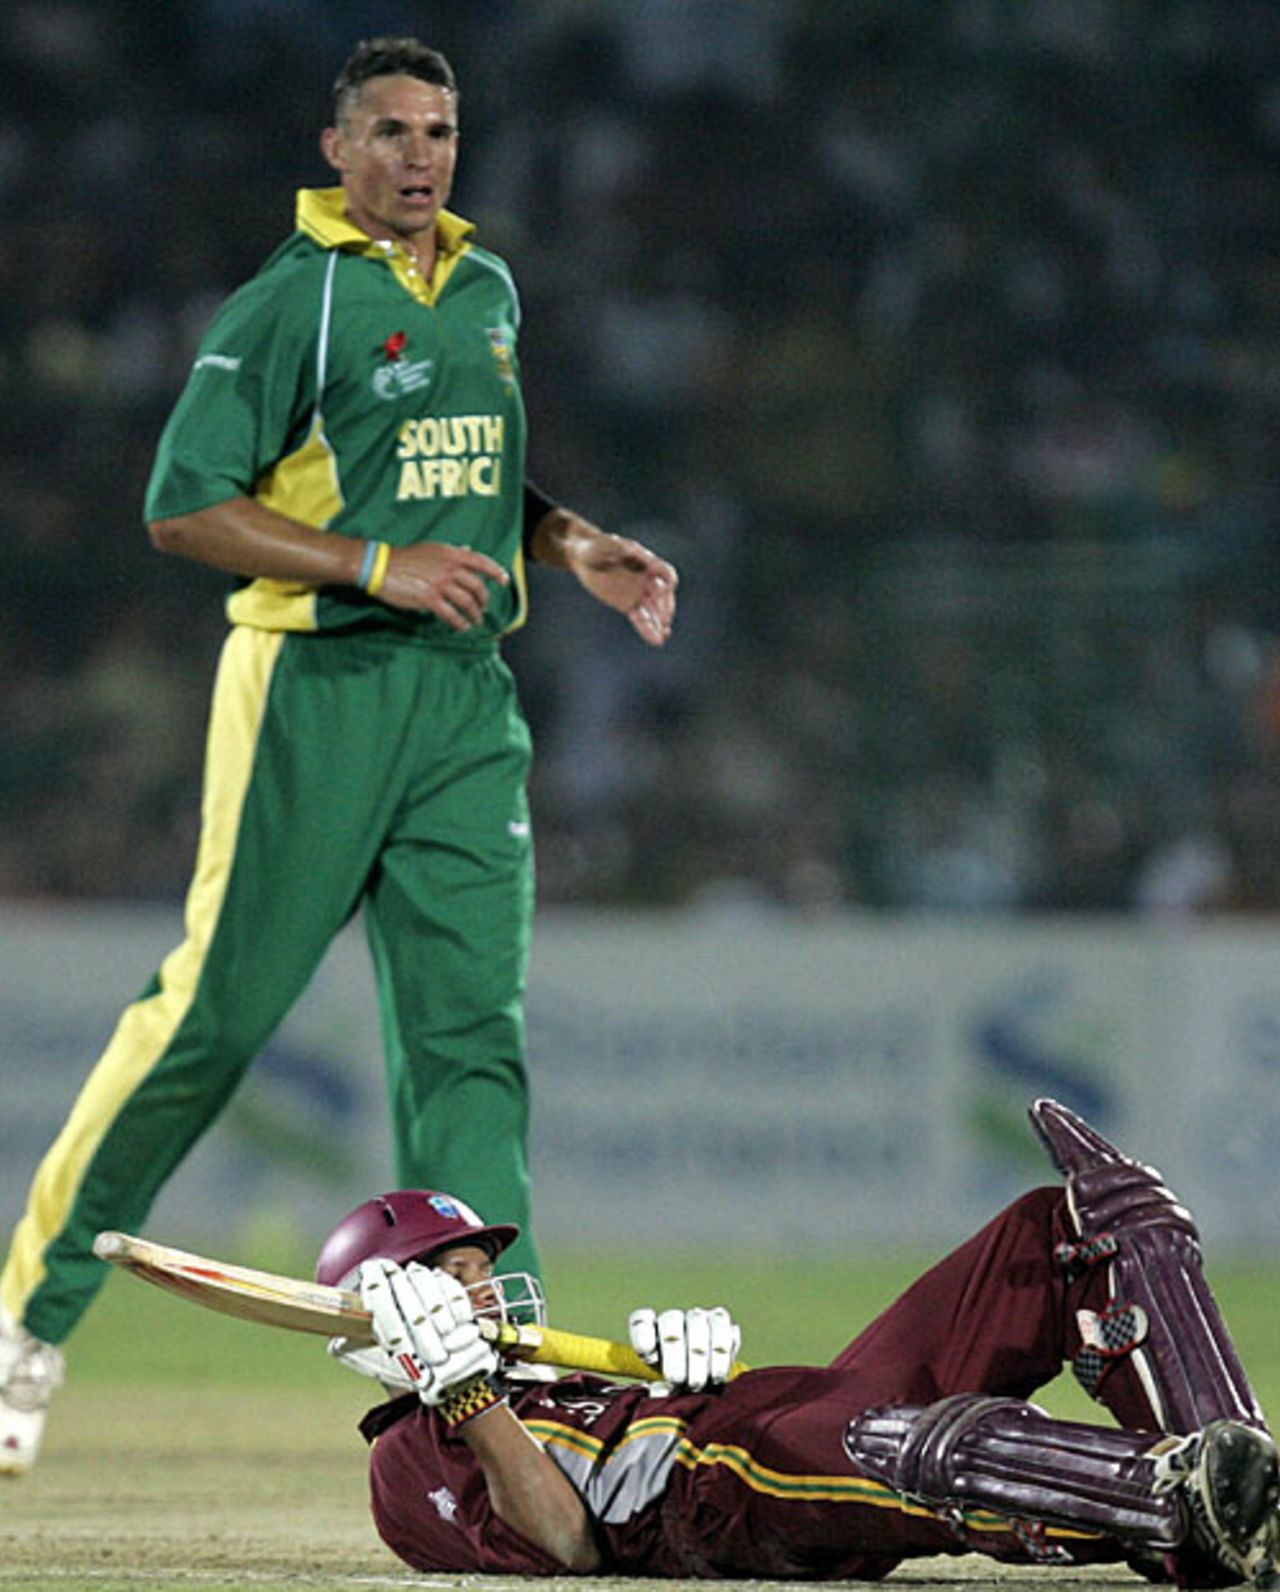 Down but not out: Andre Nel stands over a grounded Ramnaresh Sarwan, South Africa v West Indies, 2nd semi-final, Champions Trophy, Jaipur, November 2, 2006